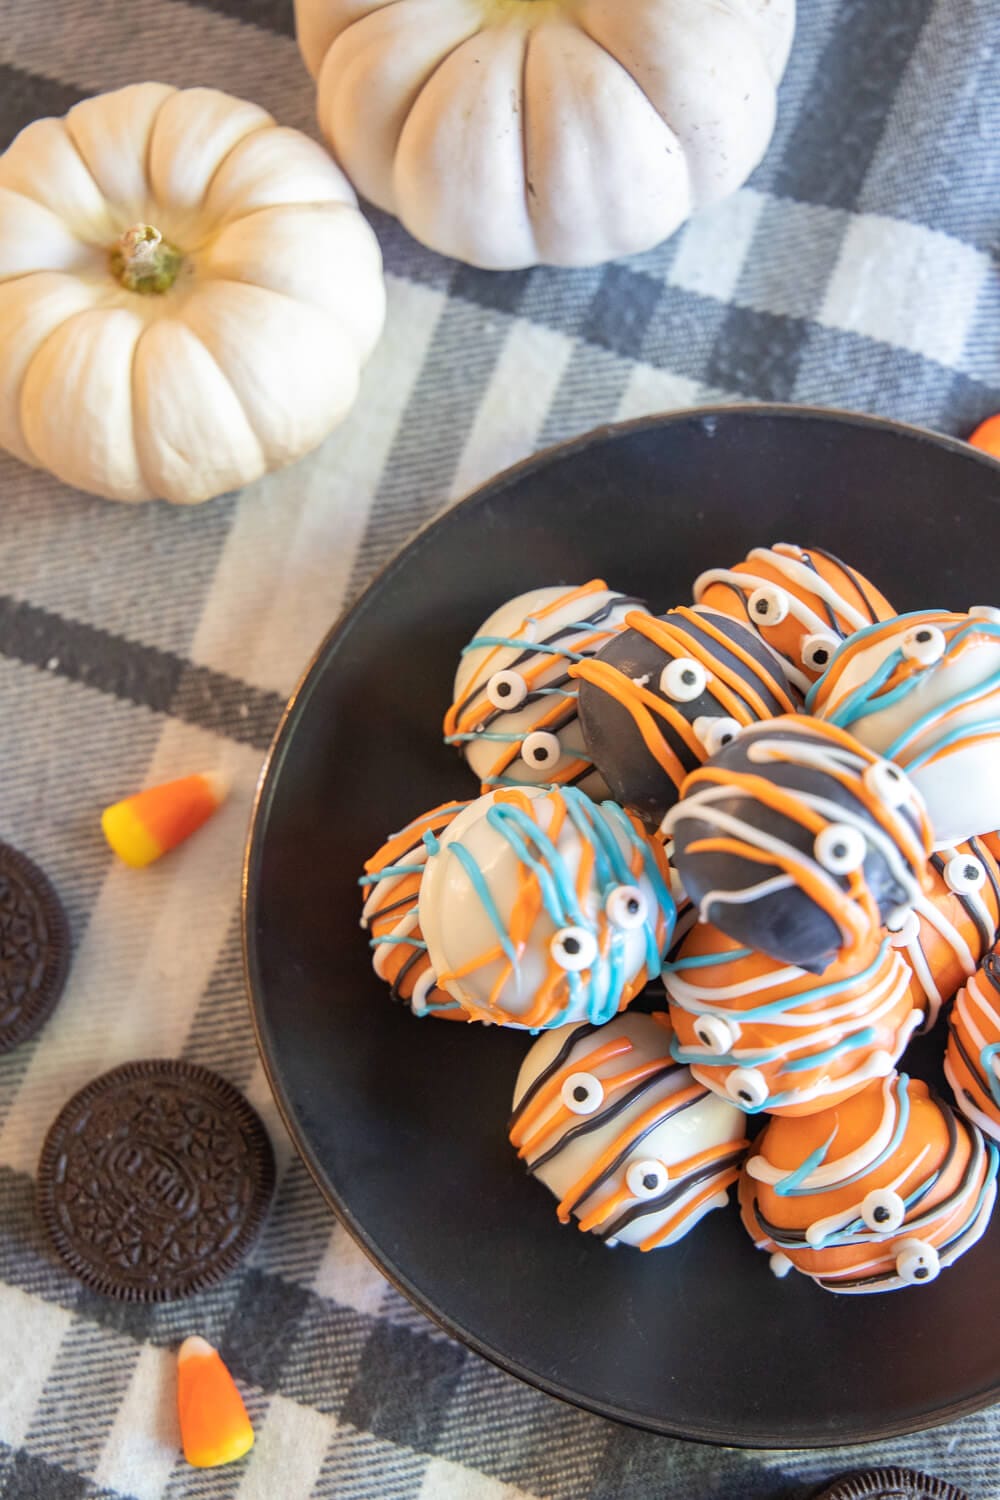 Make these adorable 3 ingredient Oreo balls perfect for Halloween! You can make these 3 ingredient oreo truffle balls for any occasion.